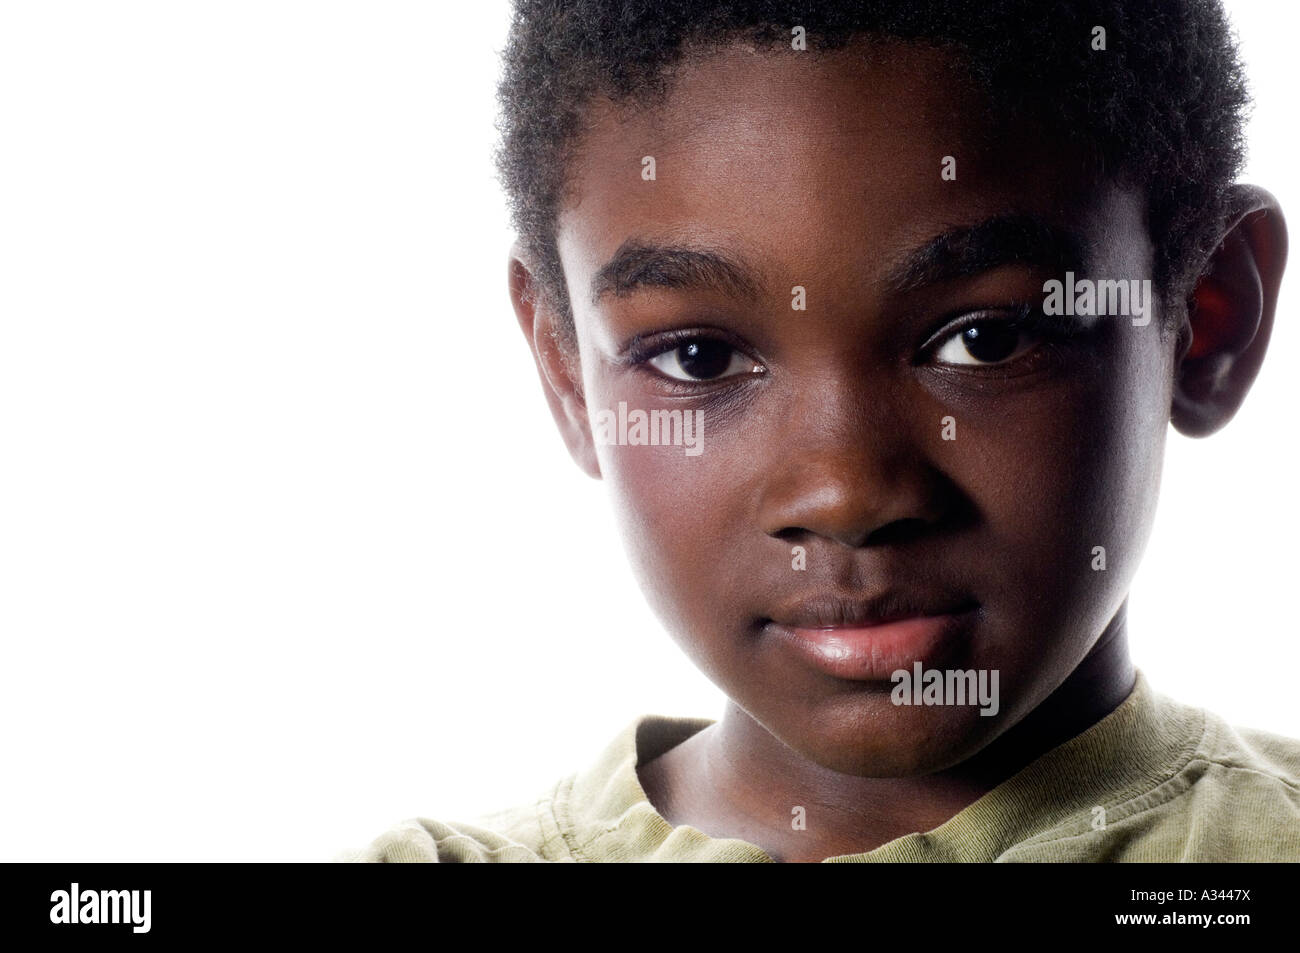 portrait of young African American boy Stock Photo